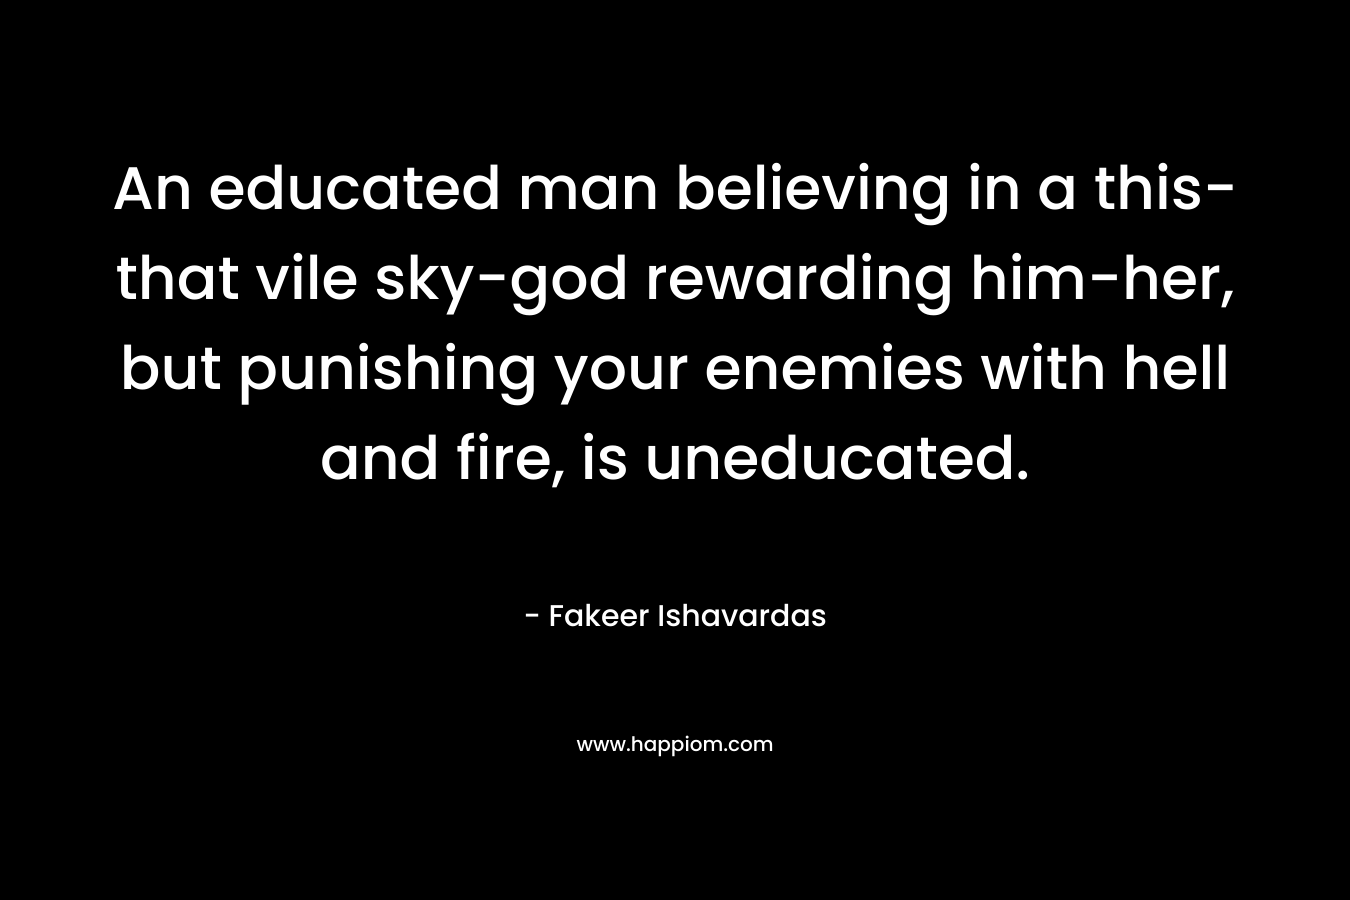 An educated man believing in a this-that vile sky-god rewarding him-her, but punishing your enemies with hell and fire, is uneducated. – Fakeer Ishavardas